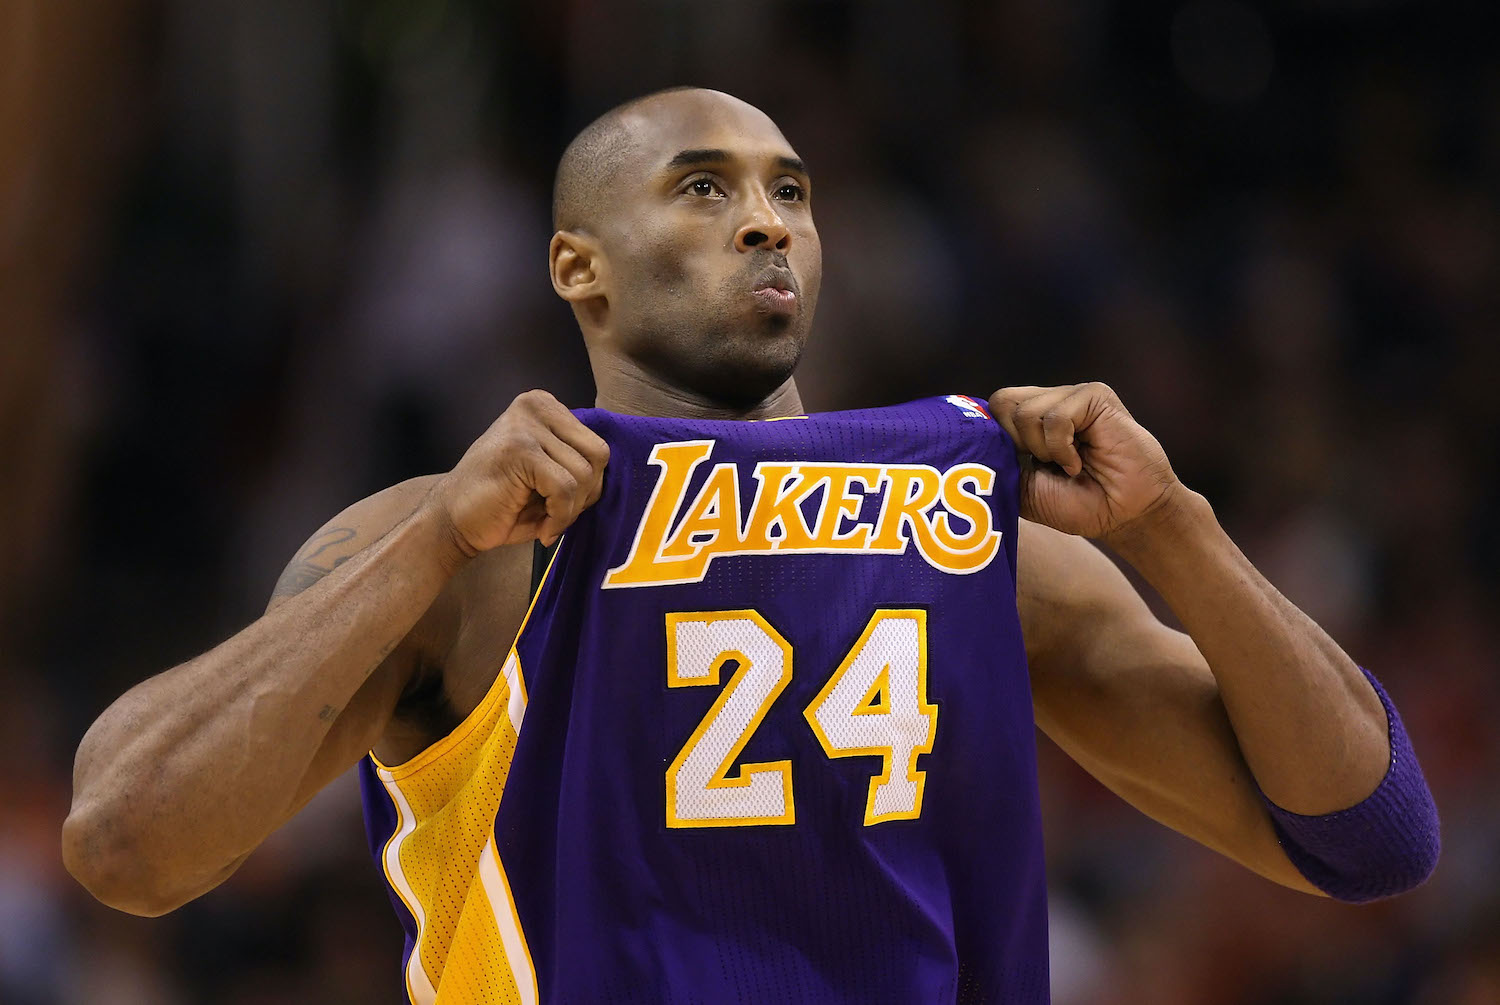 Kobe Bryant holds up his jersey during a Los Angeles Lakers game.